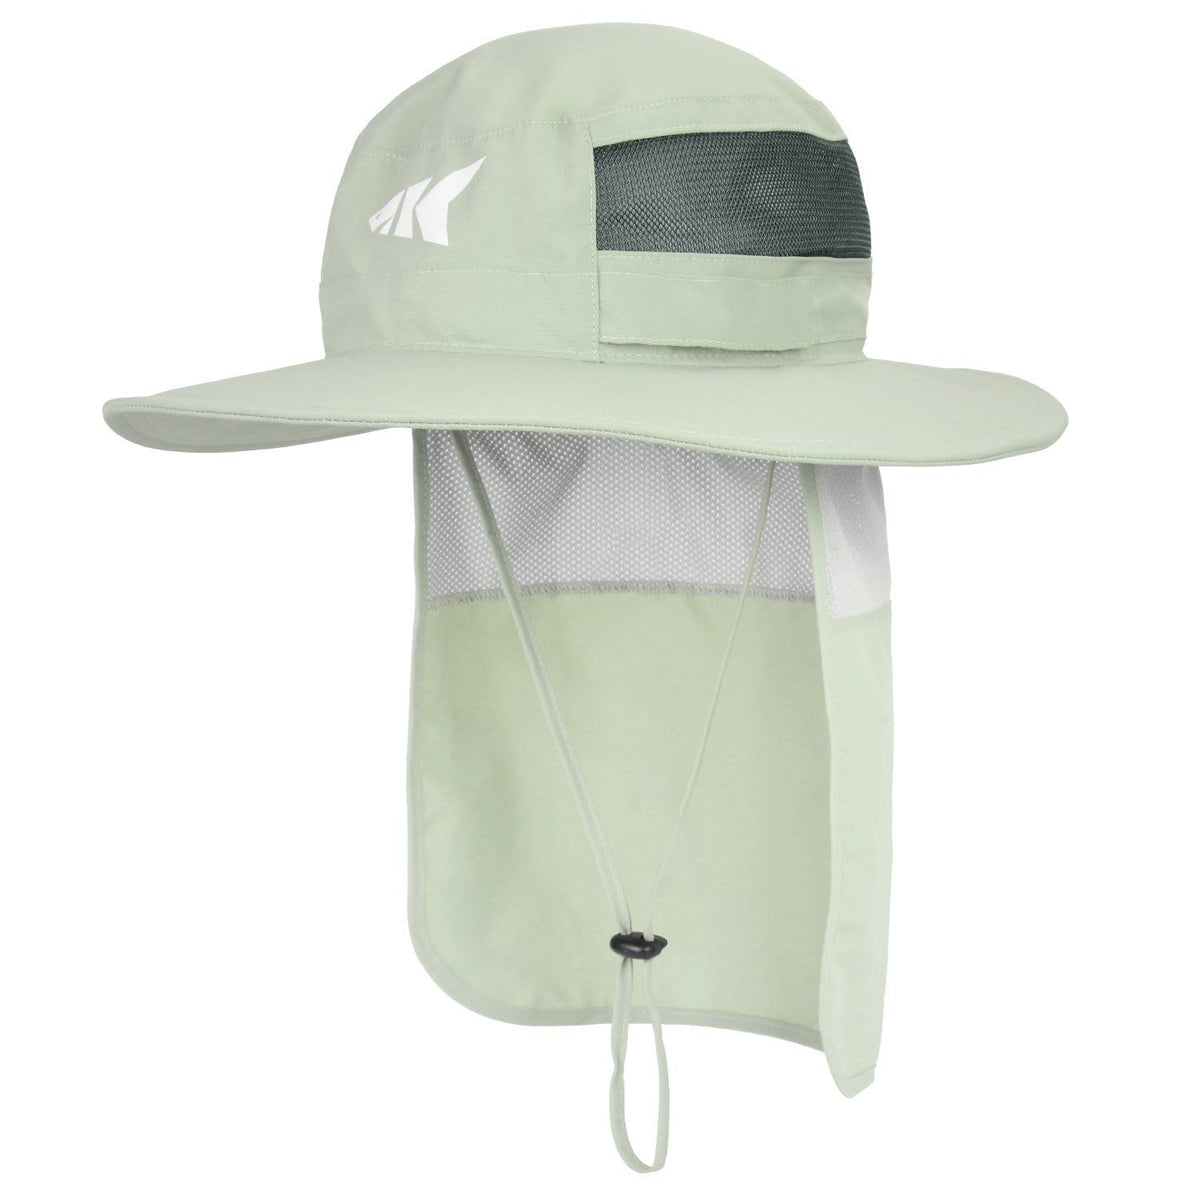 KastKing UPF 50 Boonie Hat Fishing Hat with Removable Neck Shield